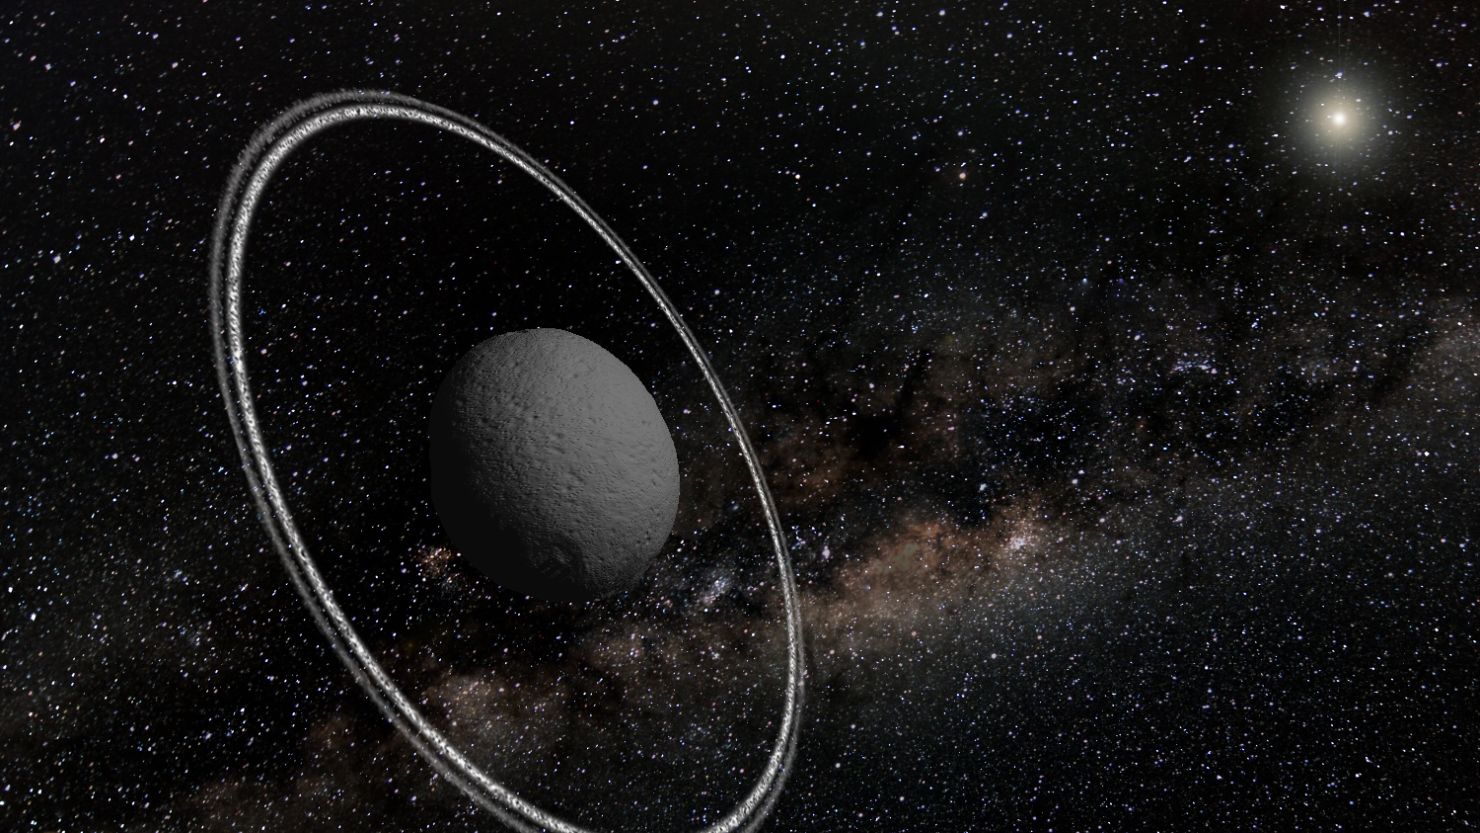 This is an artist's interpretation of the ring system around asteroid Chariklo.